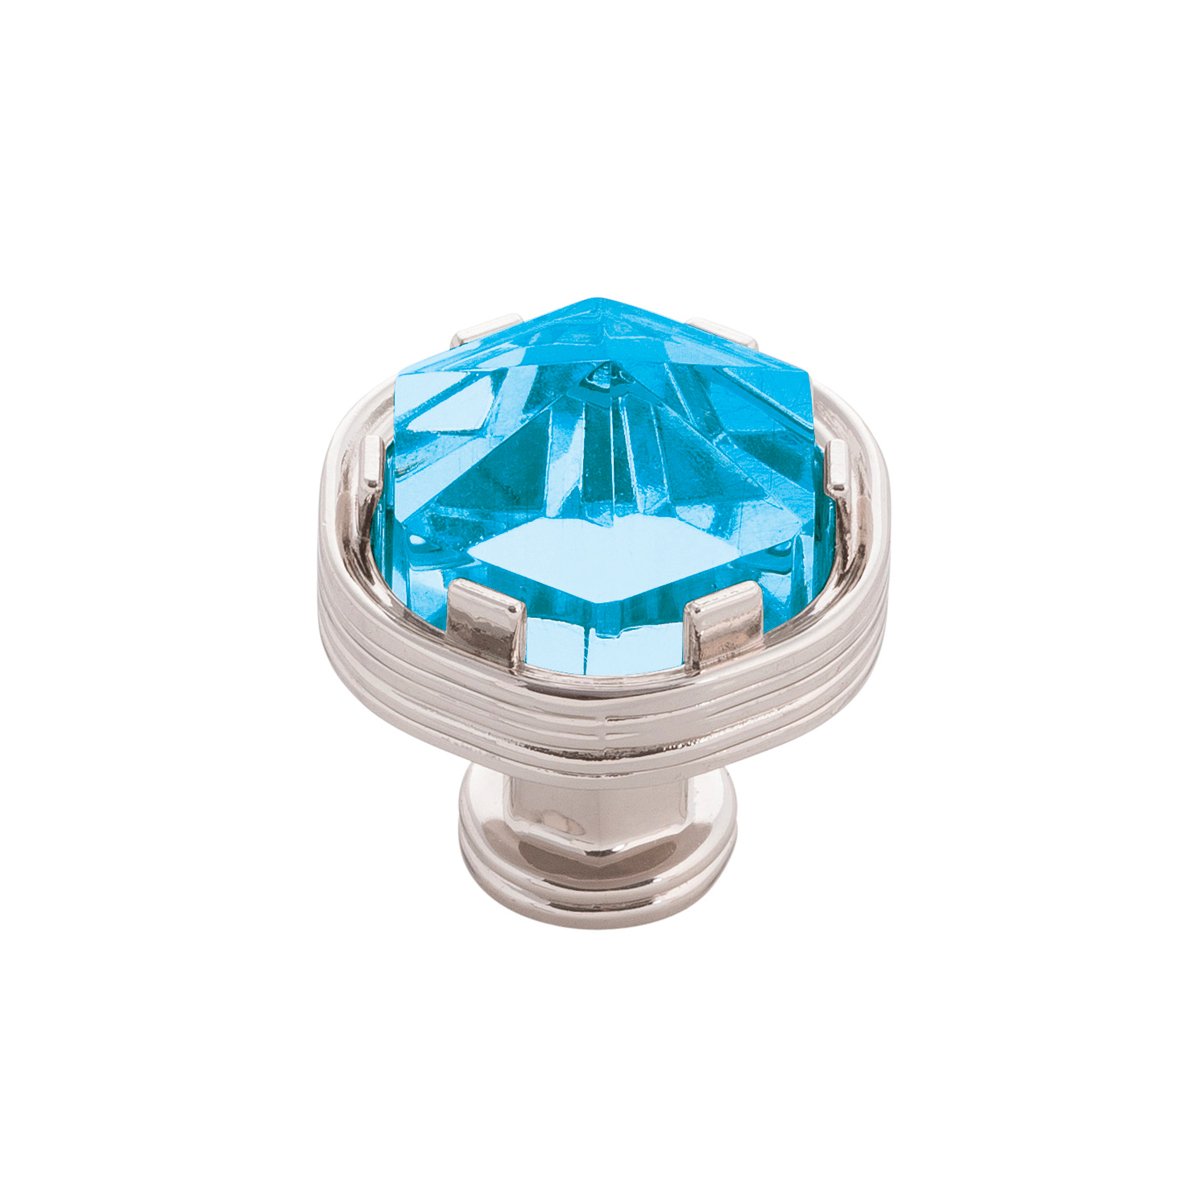 Belwith Keeler B076304GC-14 1-3/16 In. Chrysalis Knob - Polished Nickel with Cerulean Glass